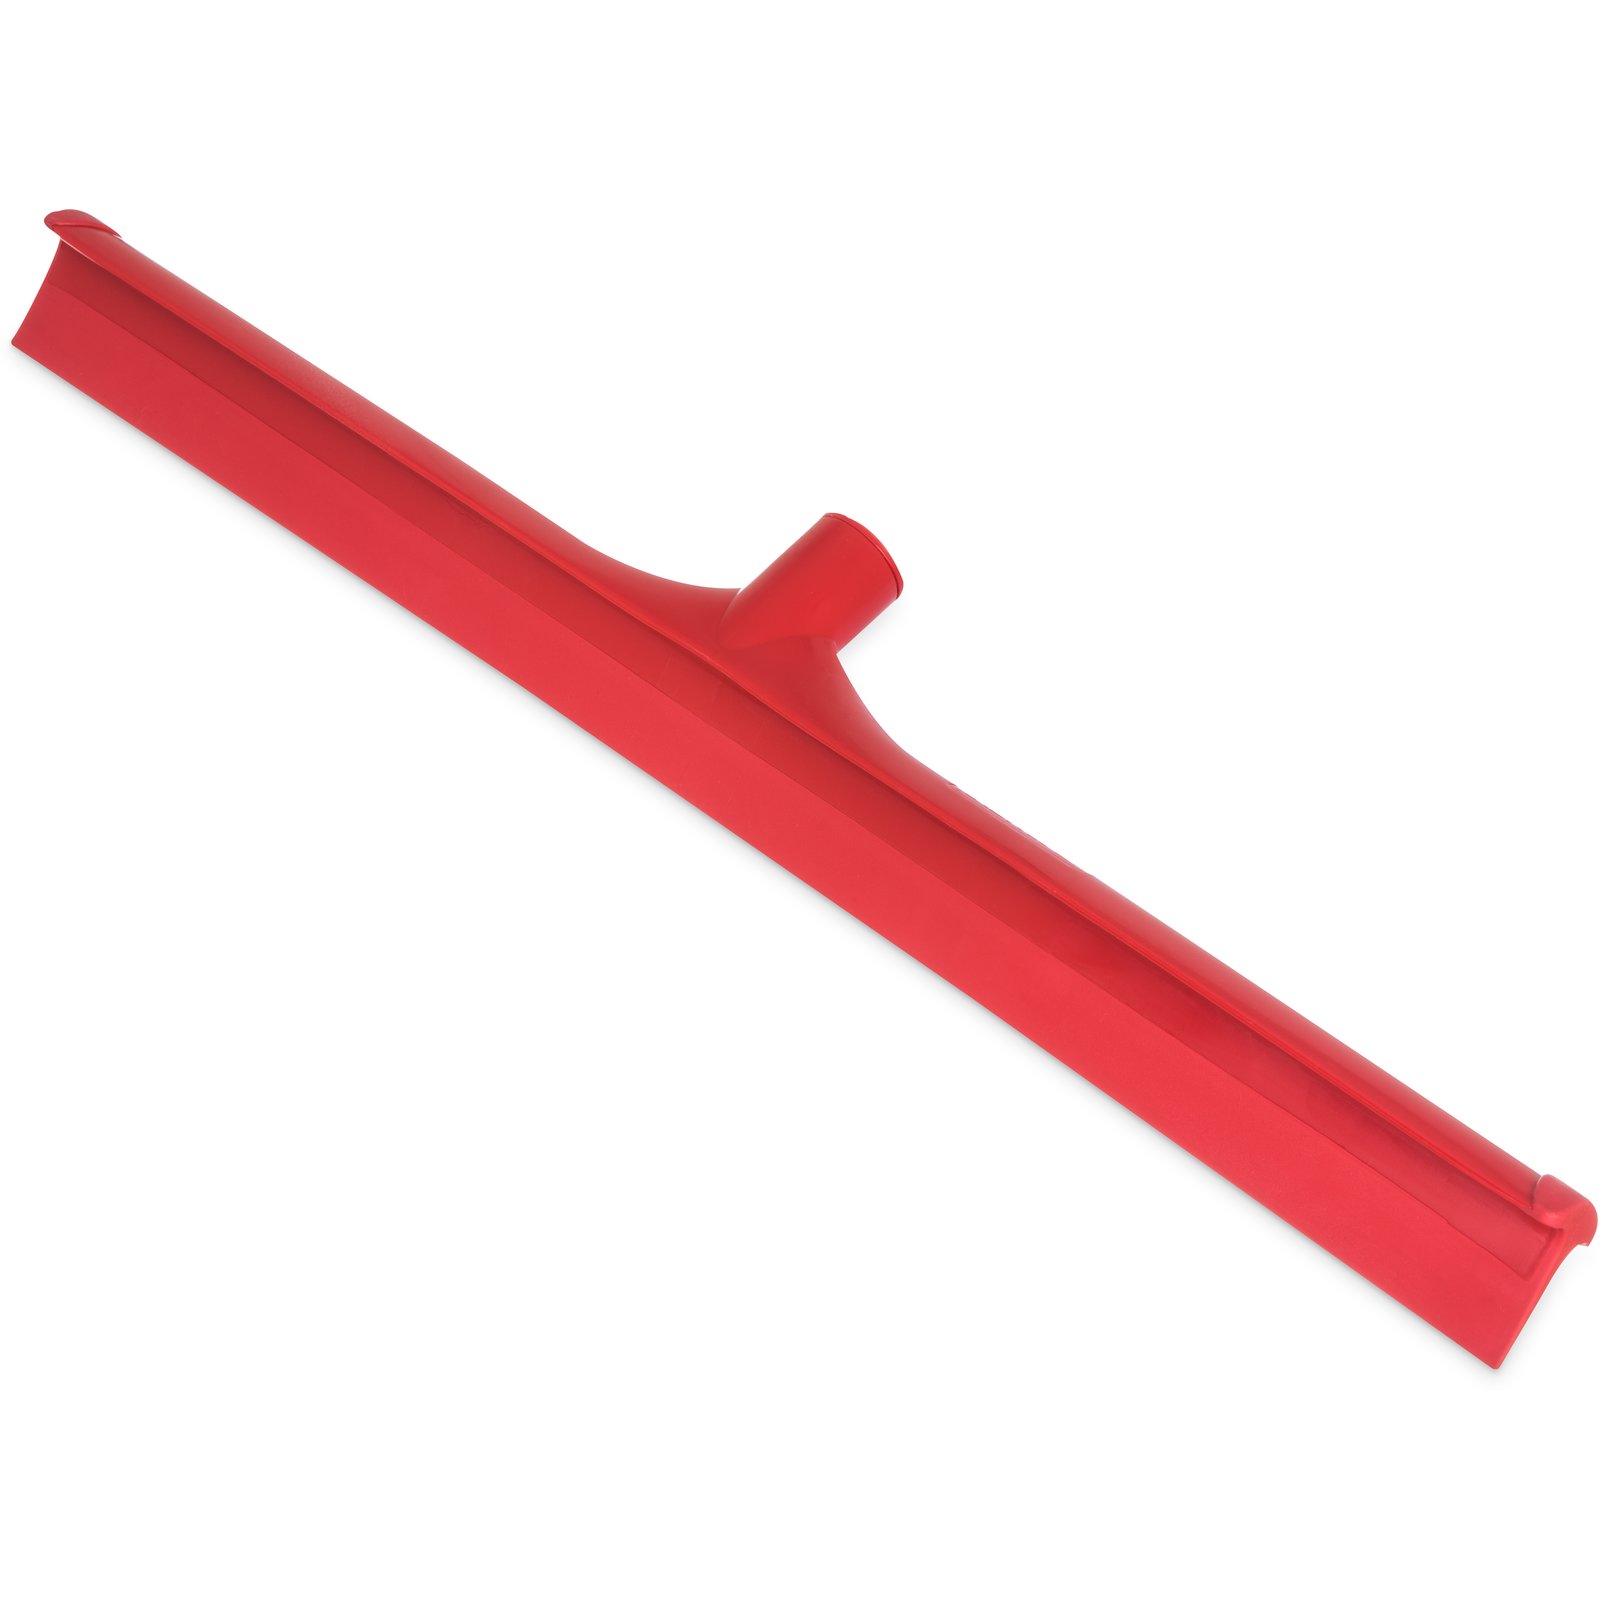 Marko, Inc. - Janitorial Supplies Online > Window Squeegees & Accessories >  8 Inch Red Rubber Blade Professional Window Squeegee with Steel Frame